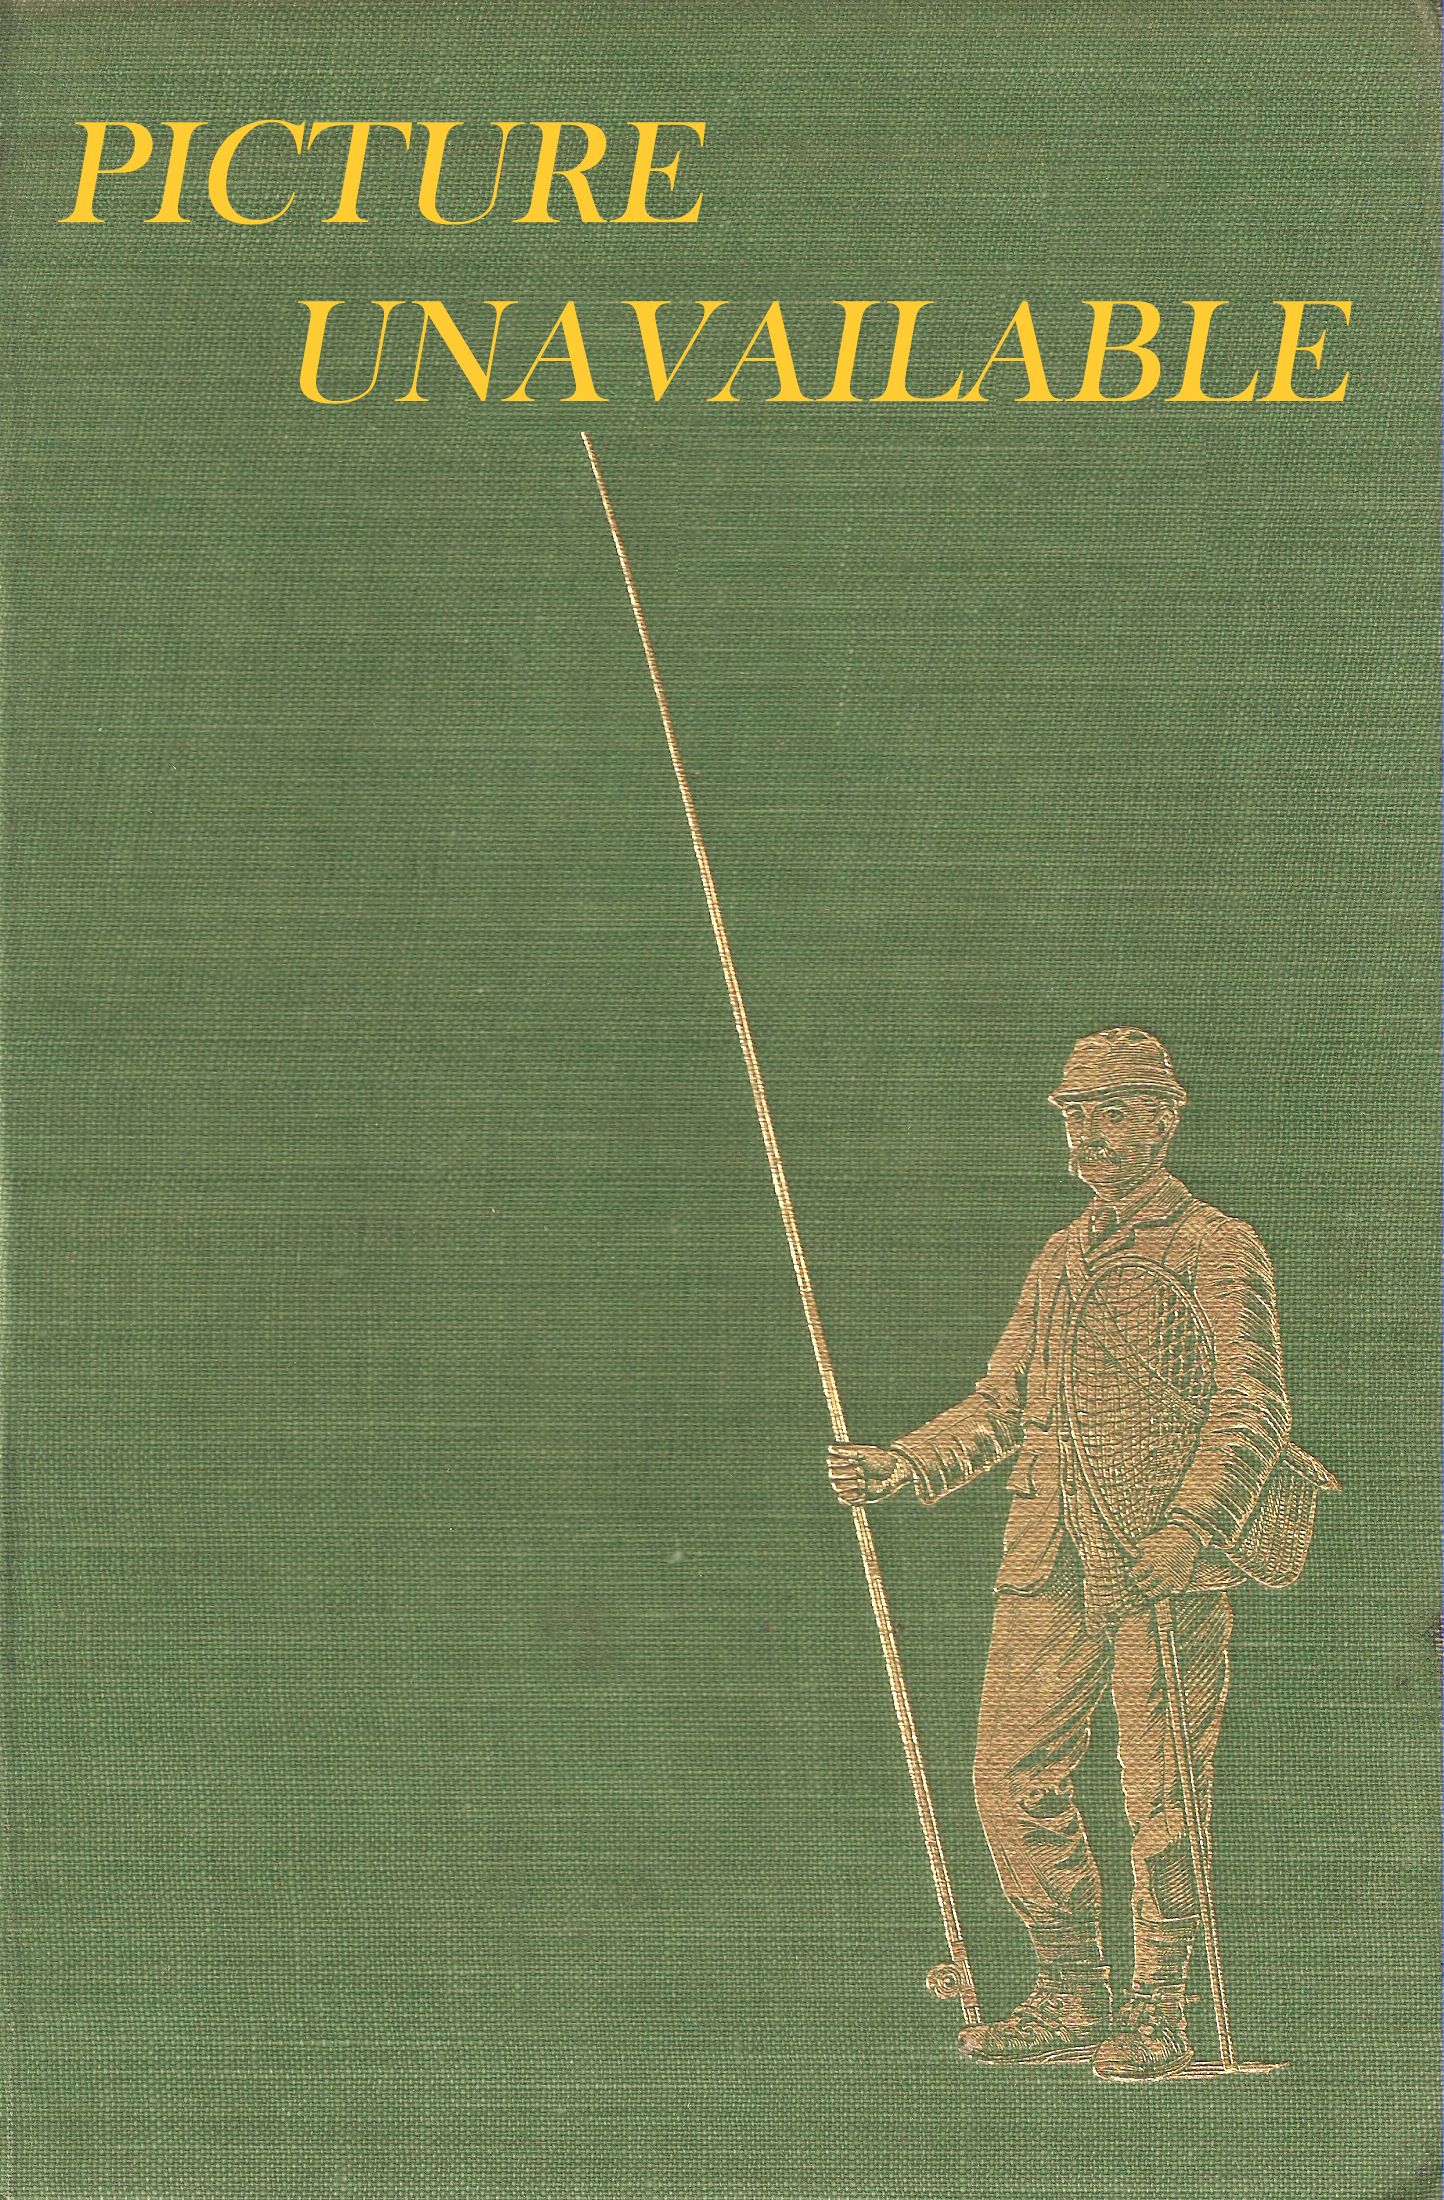 FISHING AND TRAVEL IN SPAIN: A GUIDE TO THE ANGLER. By Walter M. Gallichan  ('Geoffrey Mortimer').